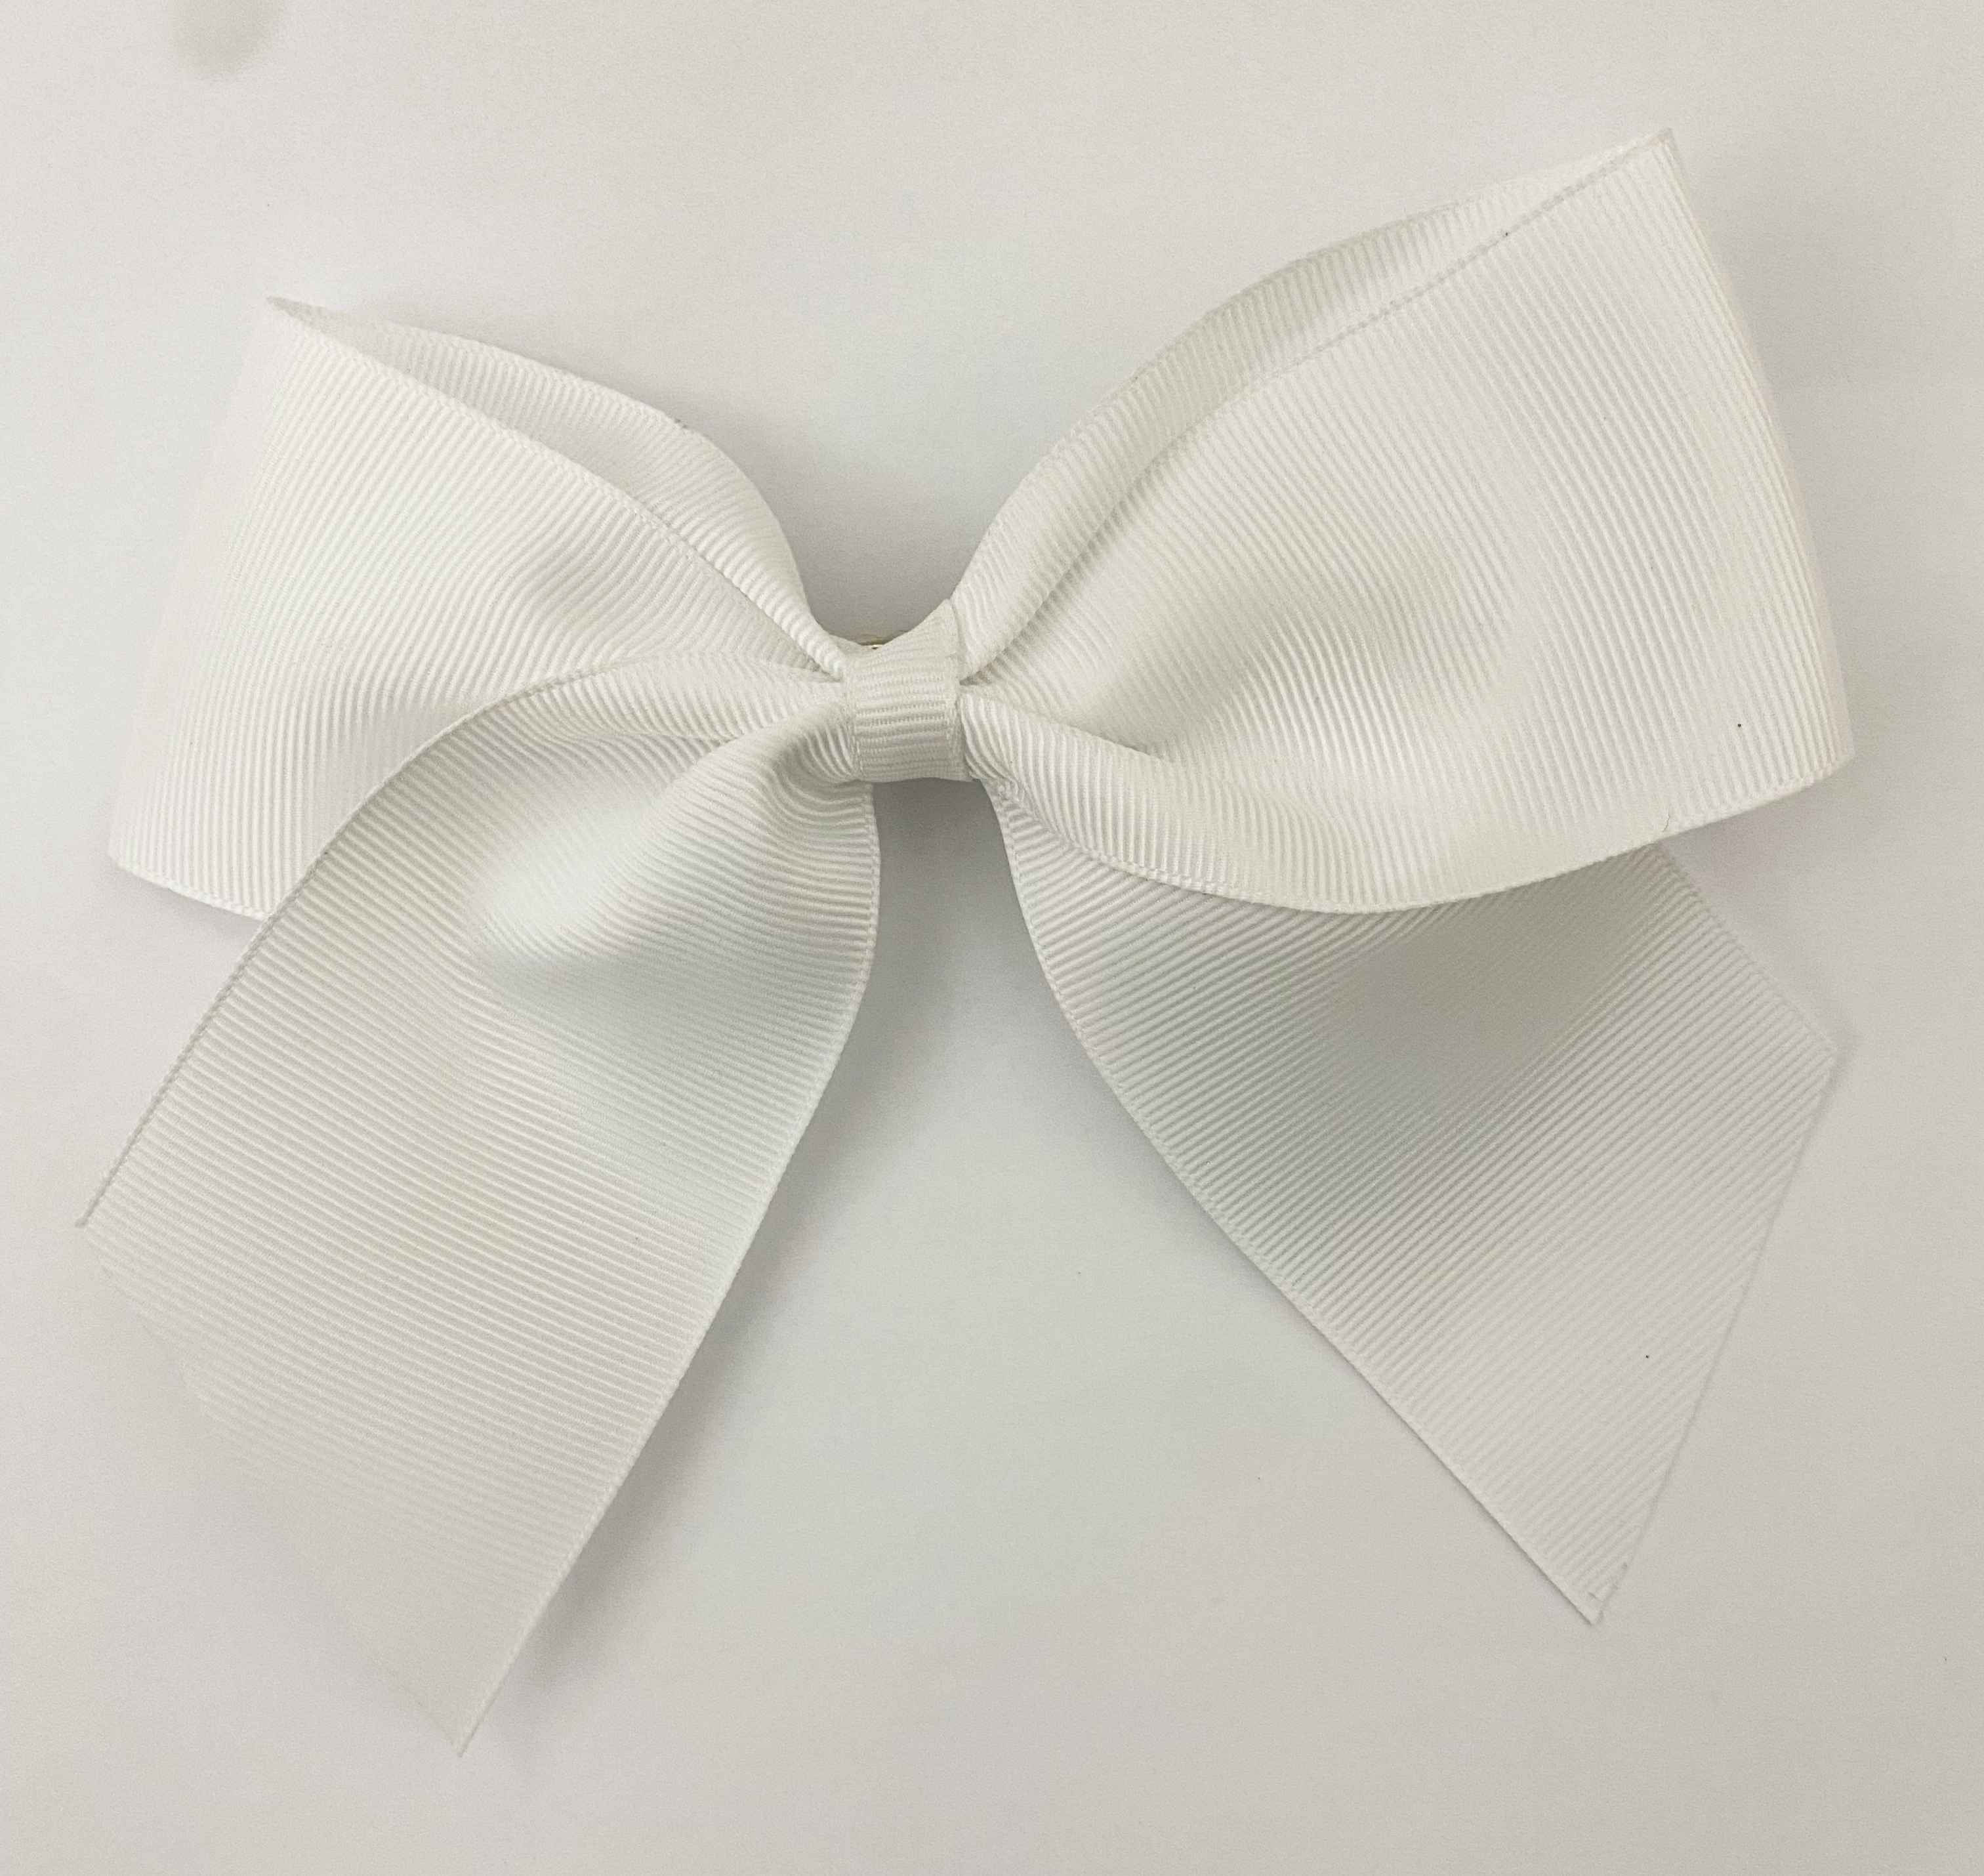 How To Make Hair Bows Using Personalized Ribbon from Name Maker